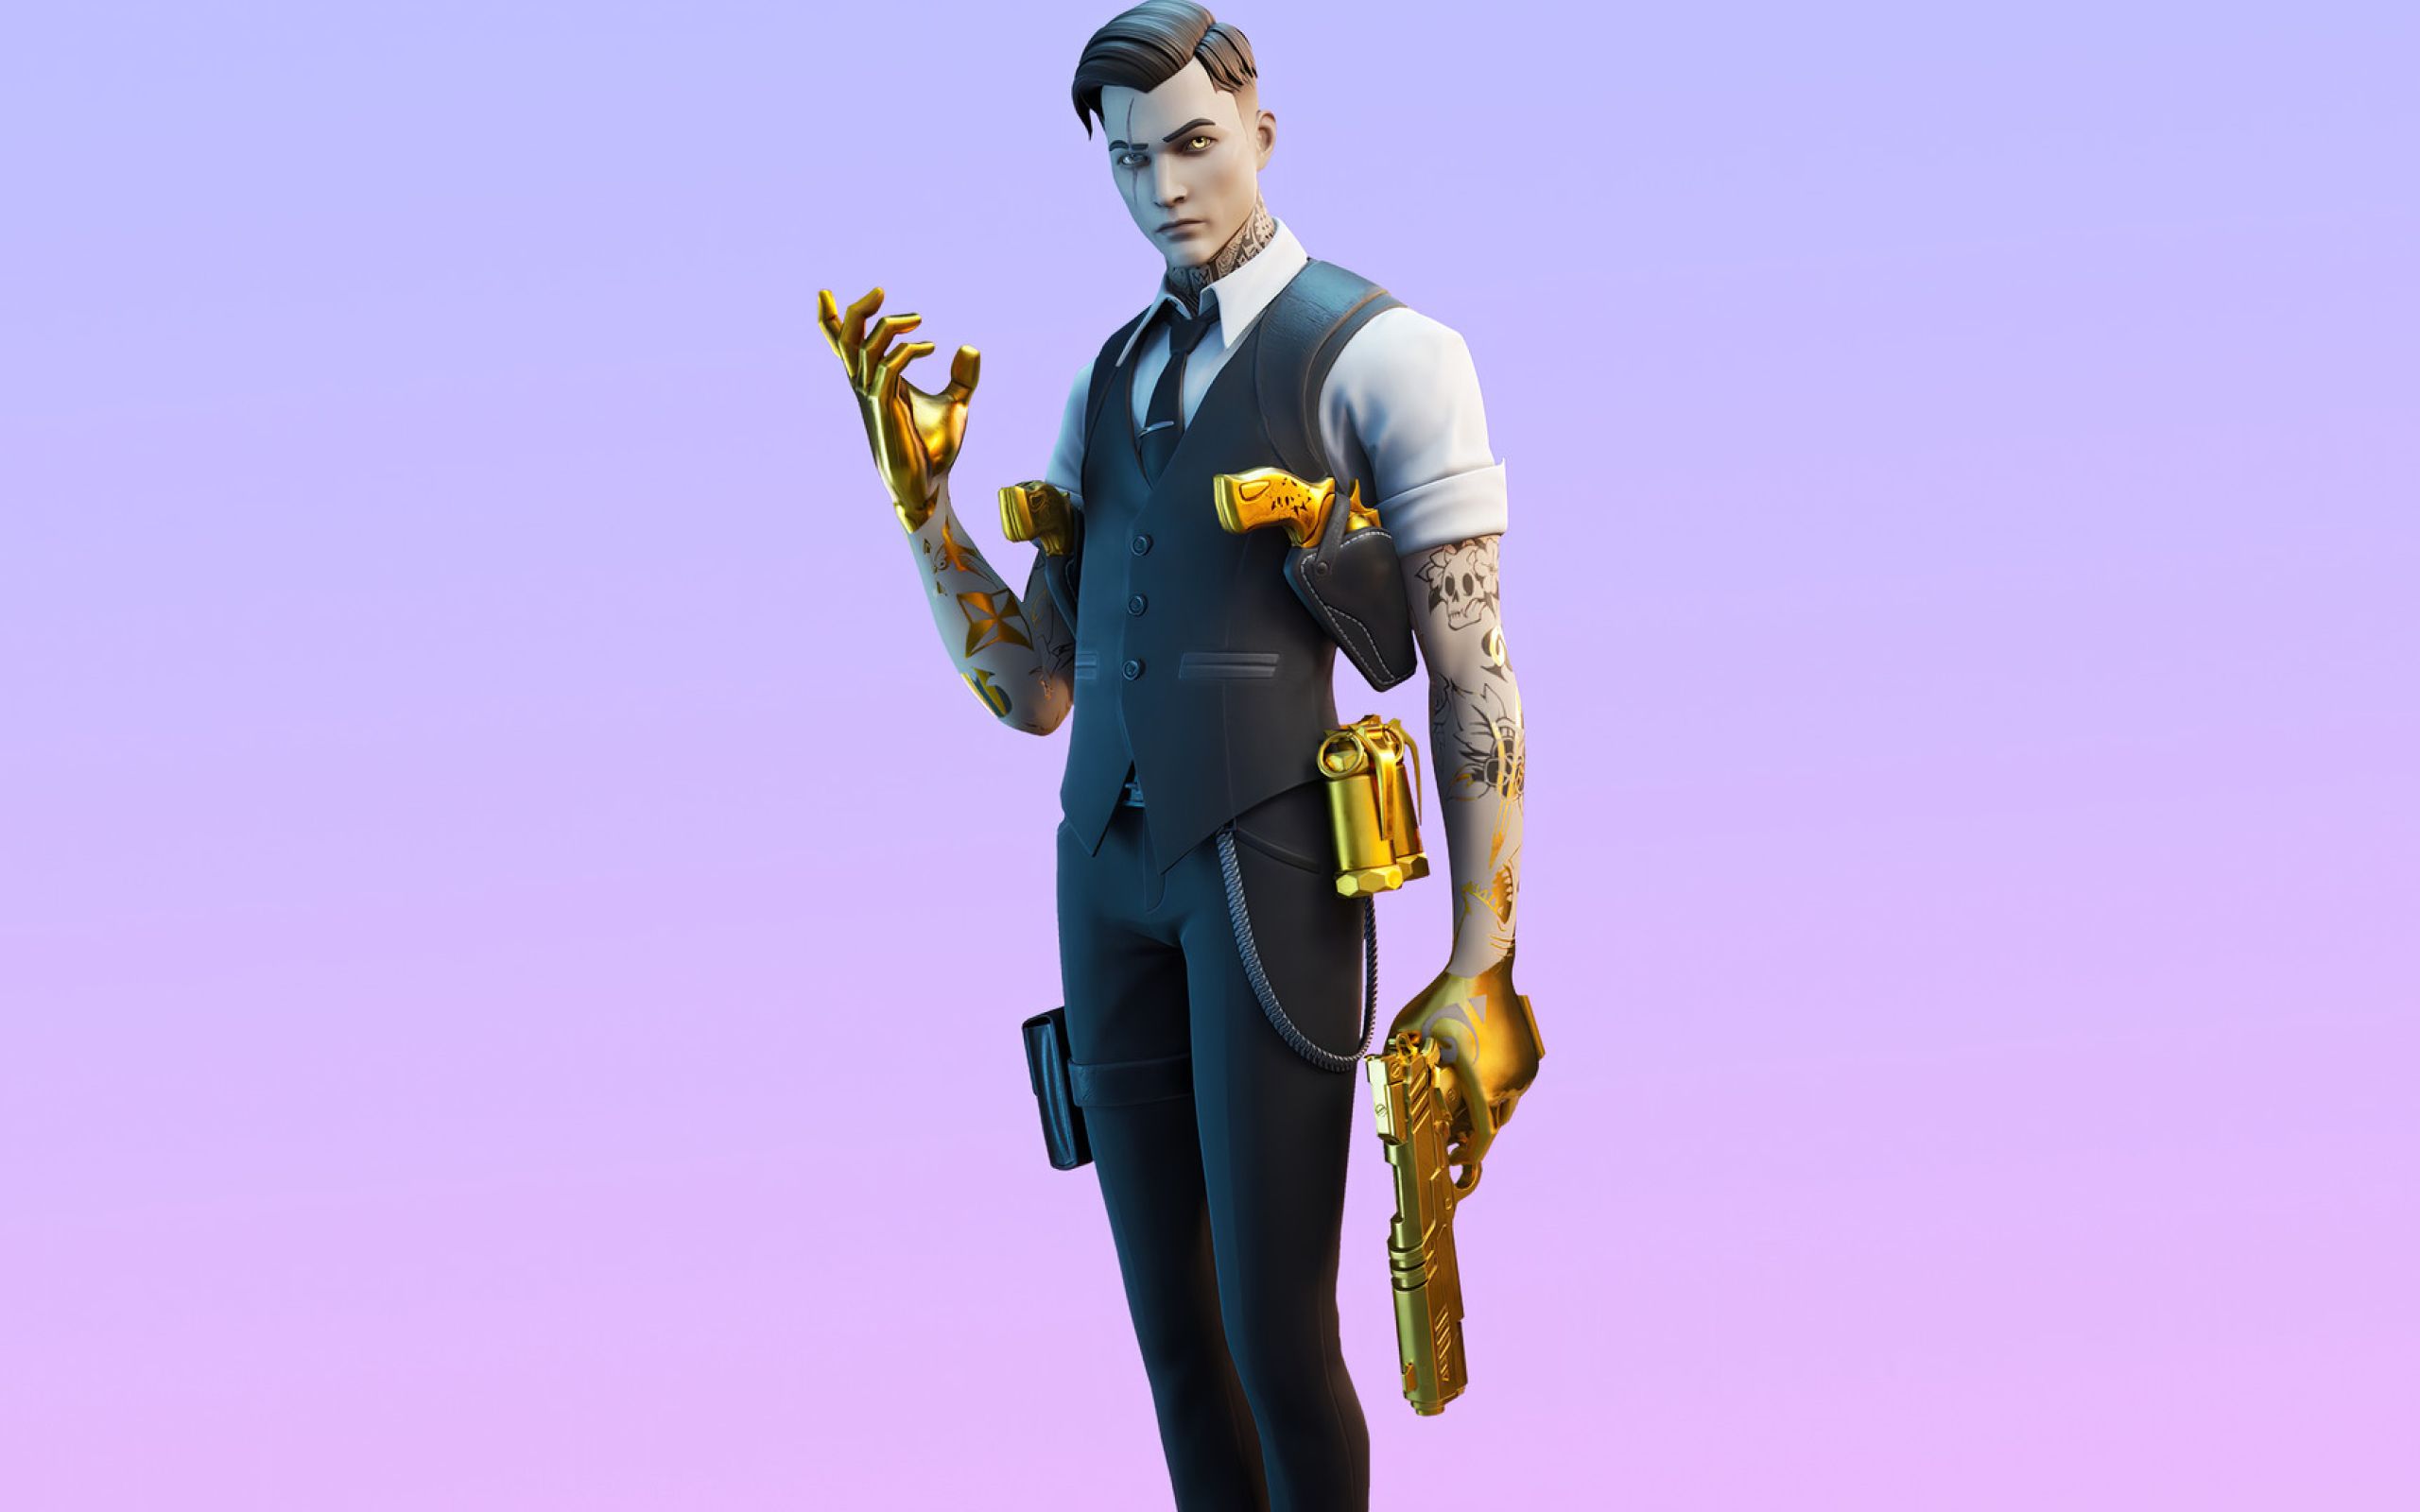 Fortnite Midas Skin 4K Outfit 2560x1600 Resolution Wallpaper, HD Games 4K Wallpaper, Image, Photo and Background